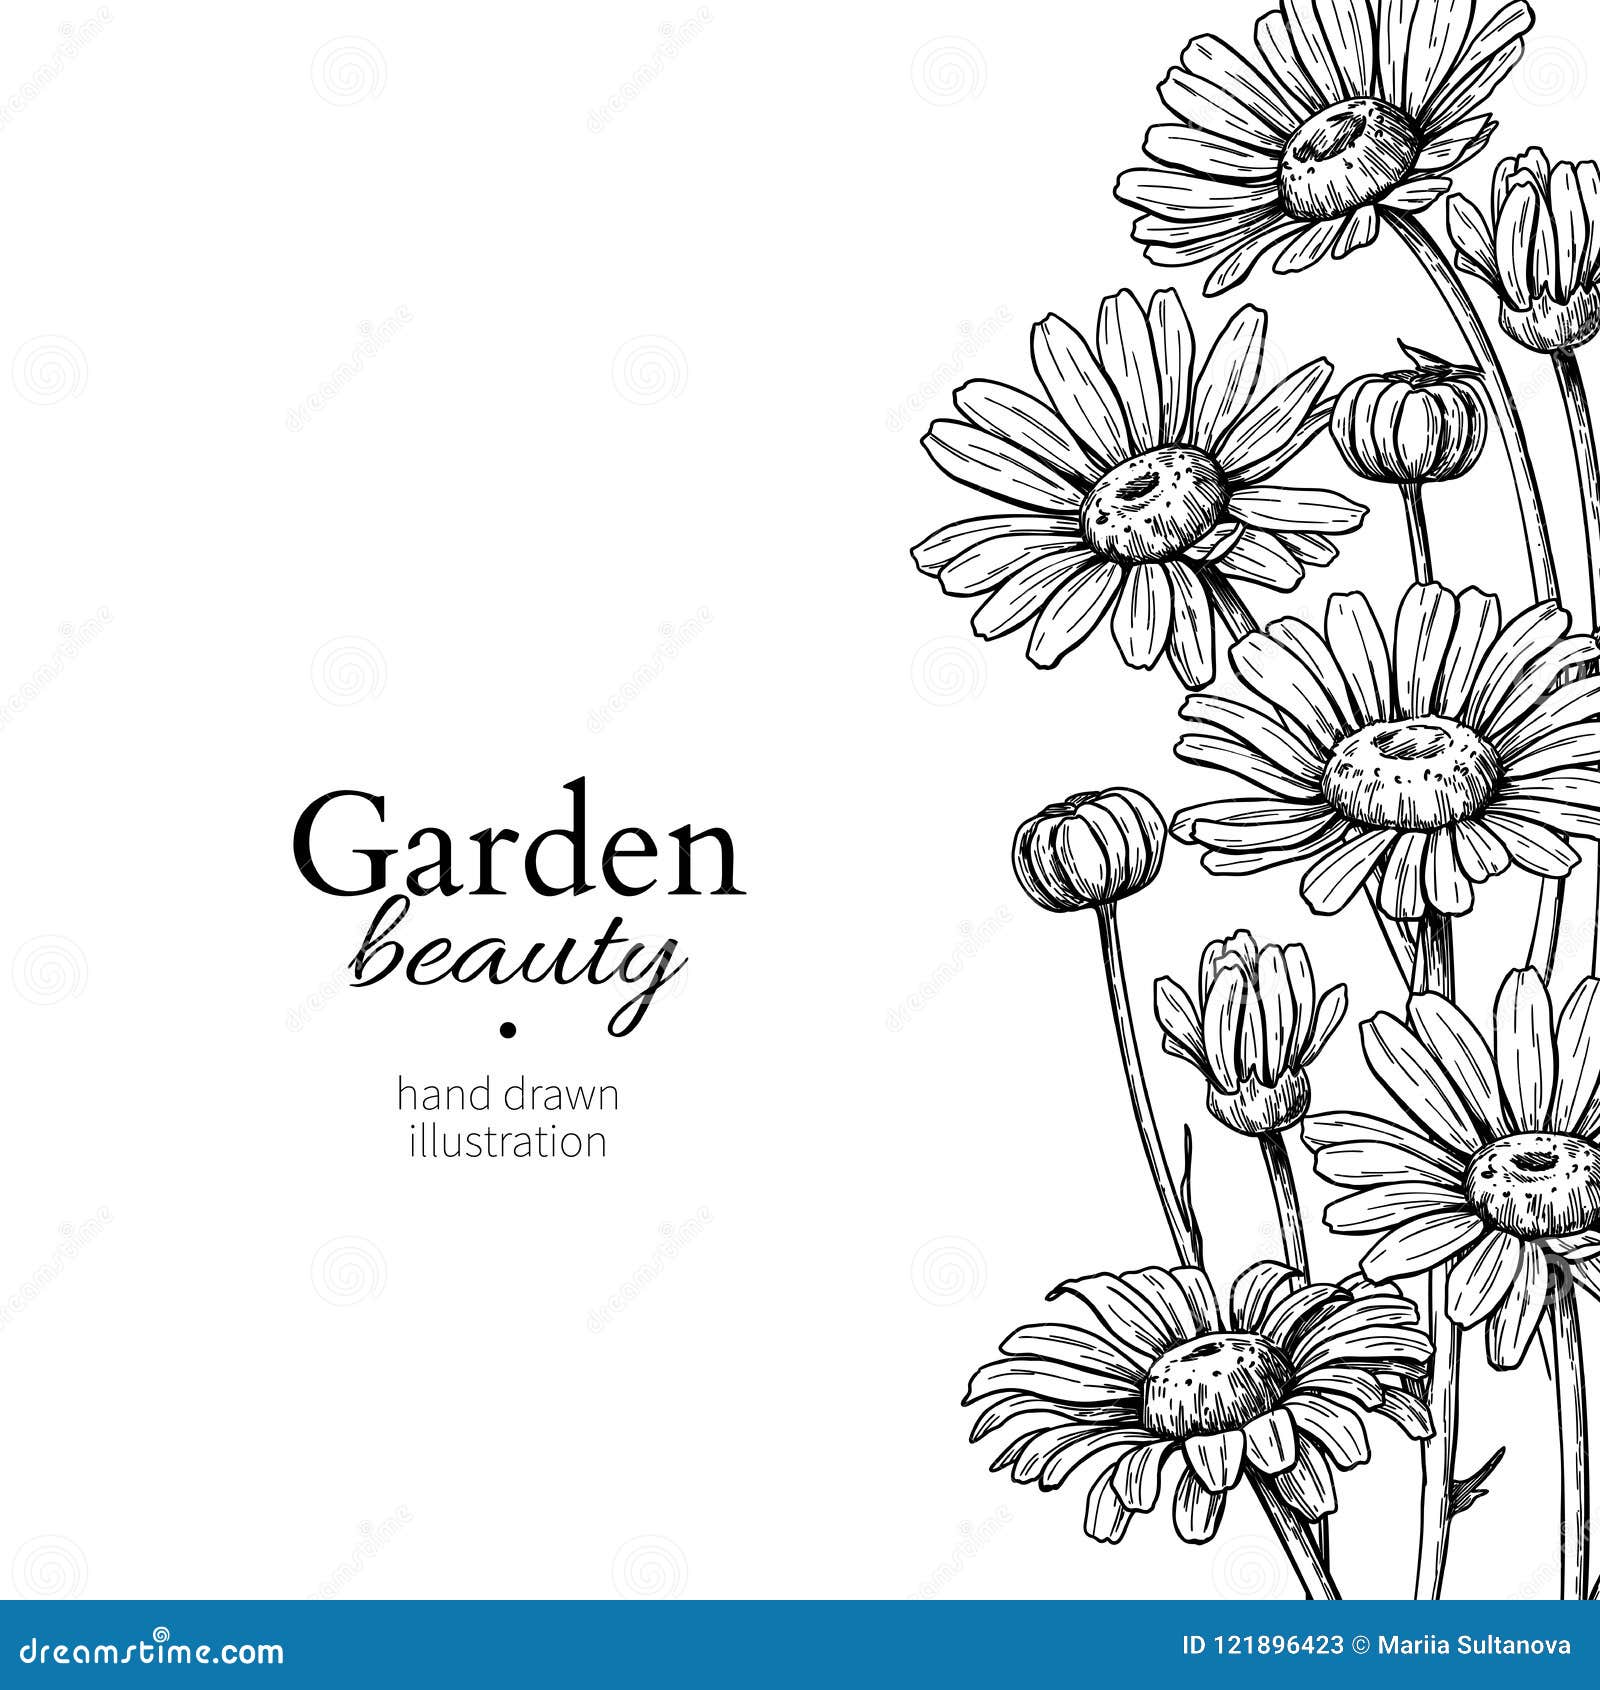 daisy flower border drawing.  hand drawn engraved floral frame. chamomile